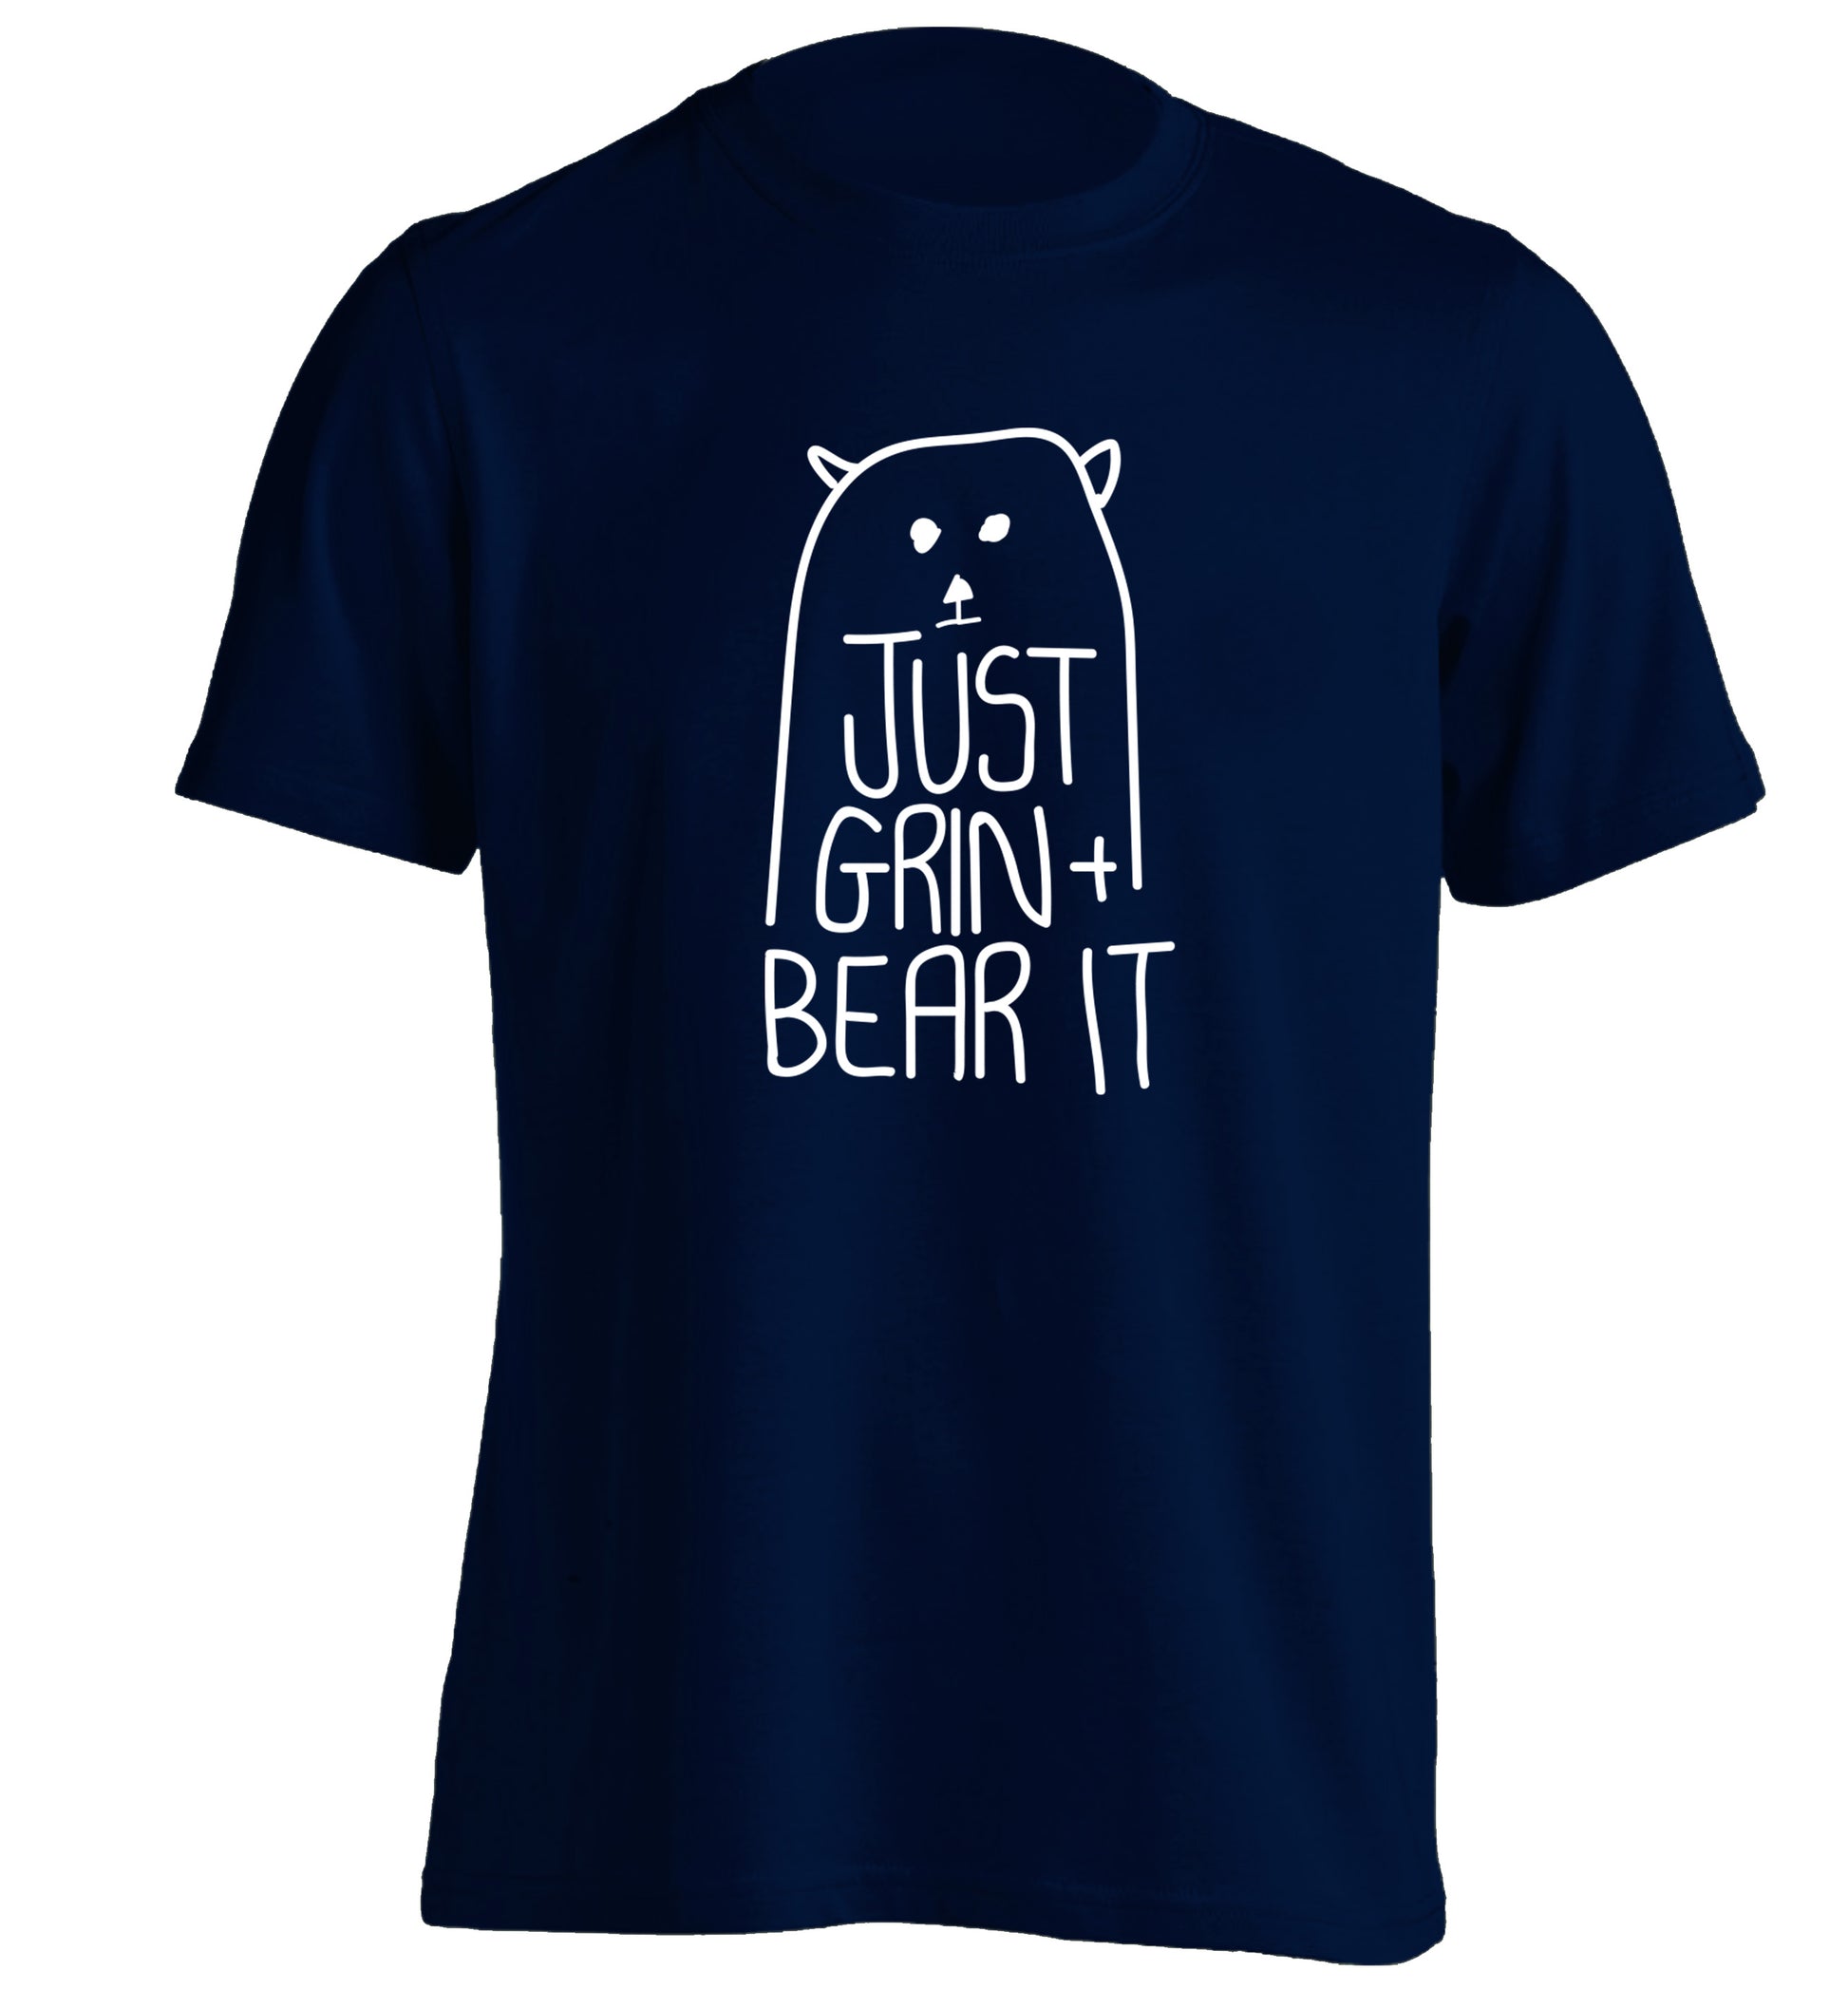 Just grin and bear it adults unisex navy Tshirt 2XL